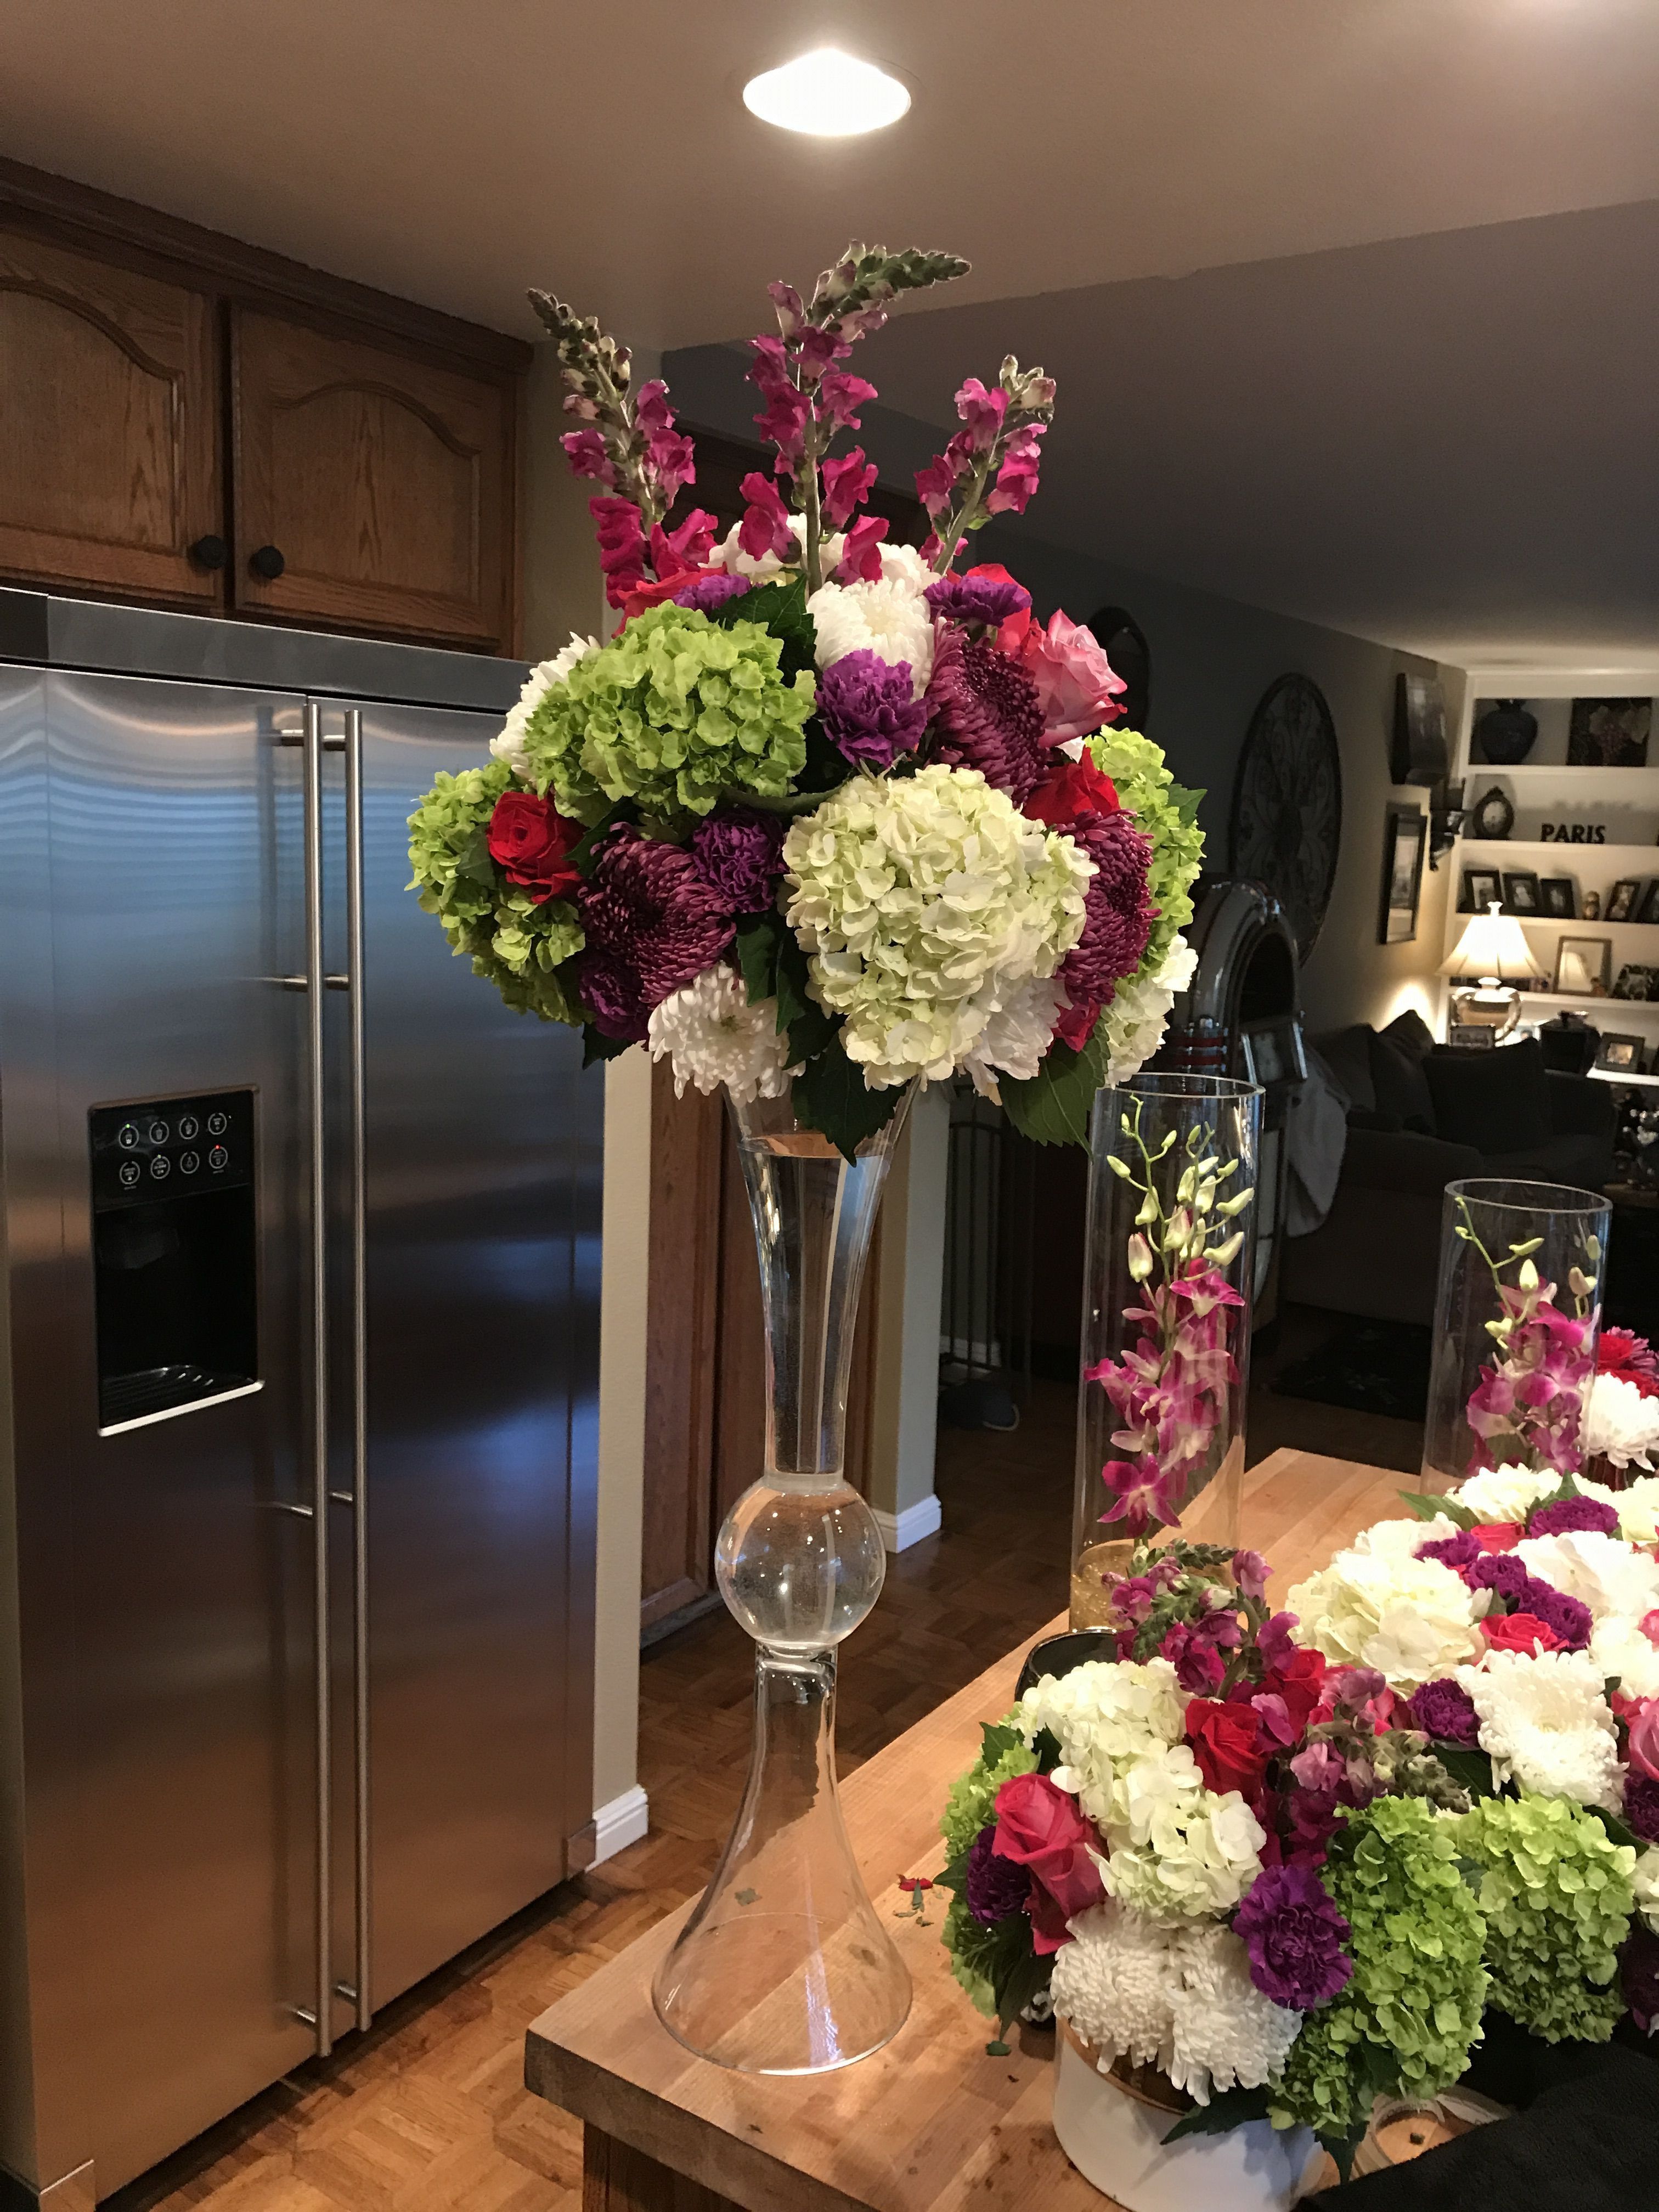 15 attractive Tall Trumpet Vases for Sale 2022 free download tall trumpet vases for sale of 24 tall vases for sale the weekly world for colorful tall centerpiece in trumpet vase